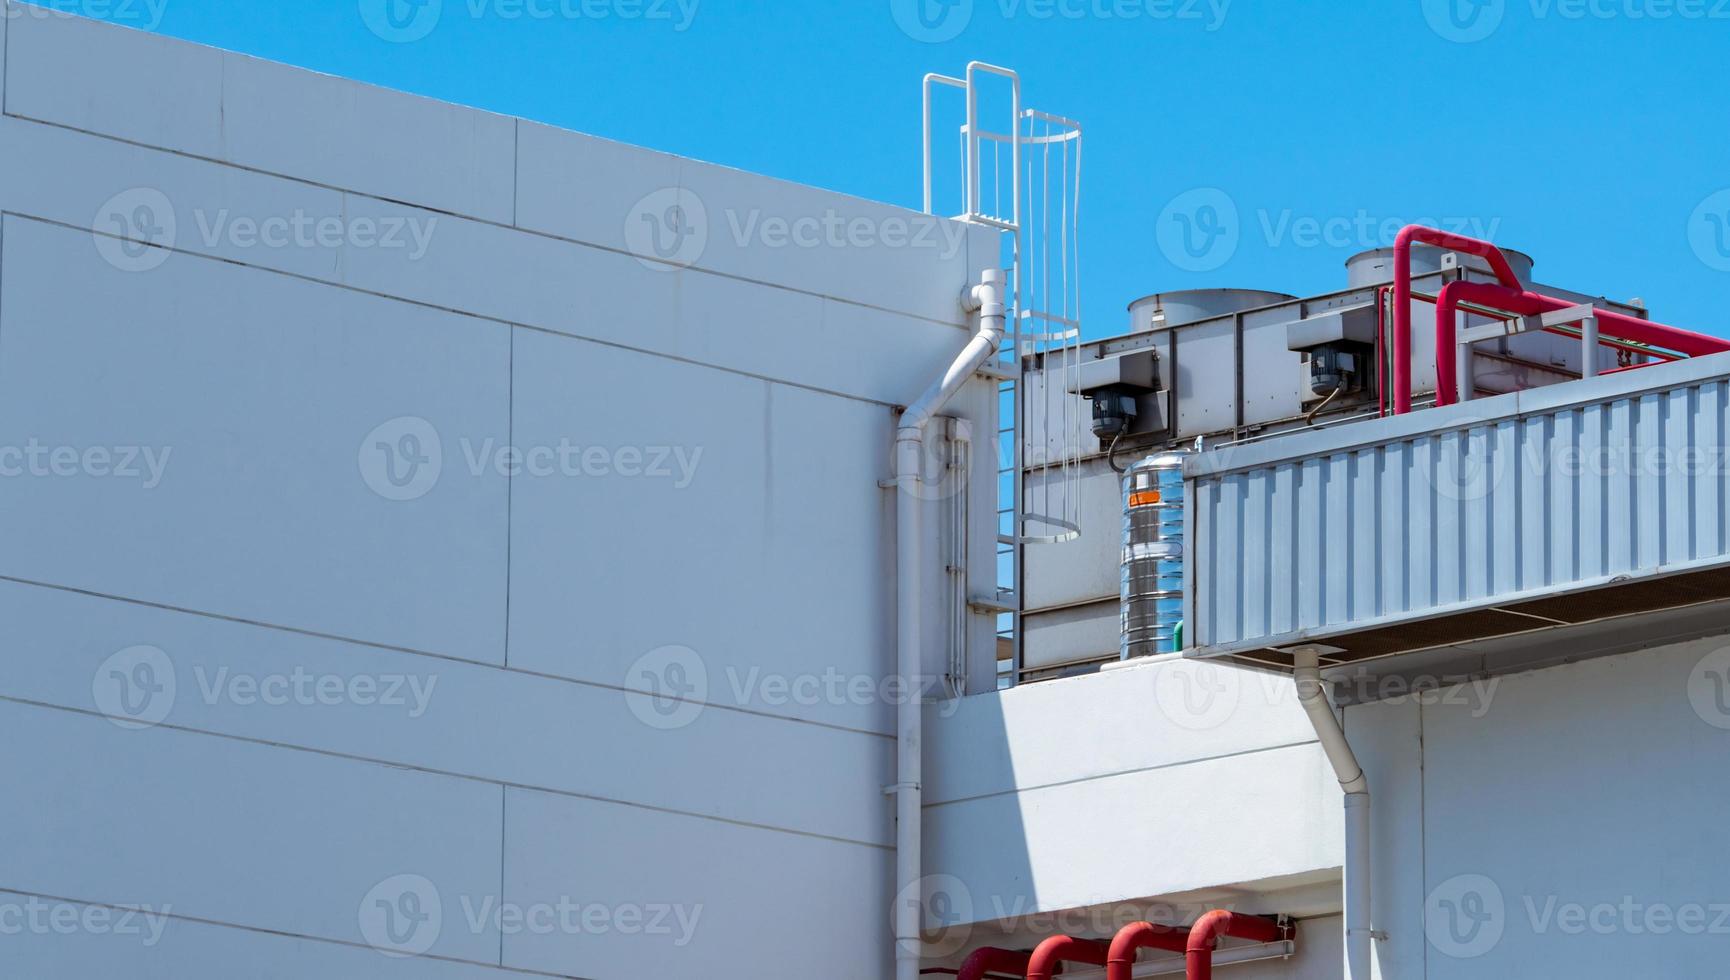 Cooling tower on roof top of building. Industrial air cooling system. Air chiller. Unit of air conditioner. Air cooled chiller with piping system on rooftop of building. Cooling tower outside building photo